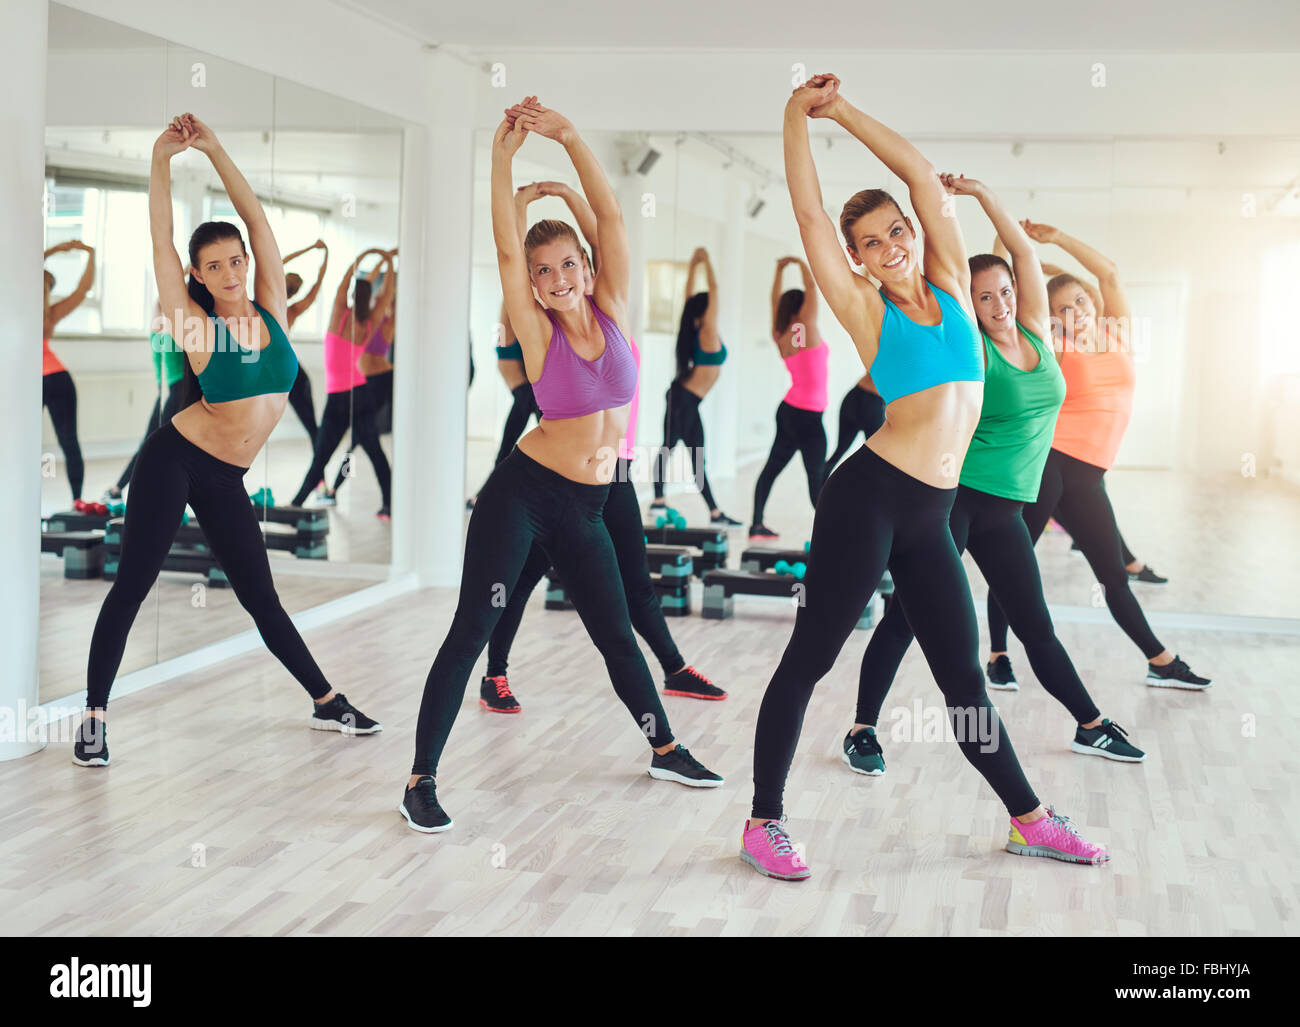 Teamwork of group of women doing exercise and looking at camera. Stock Photo